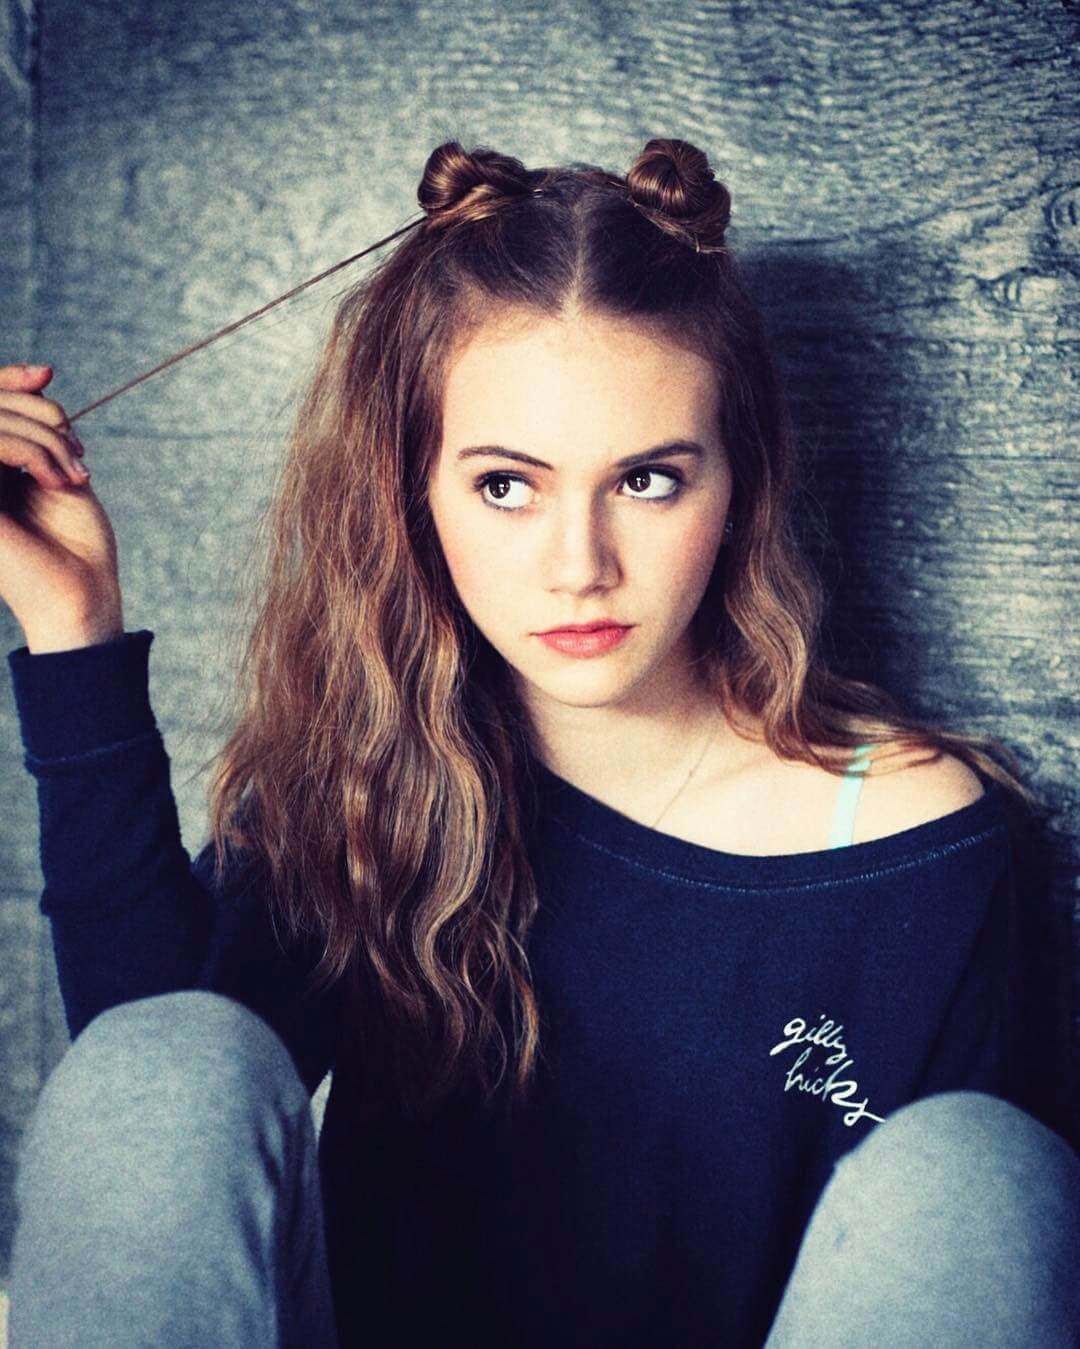 65+ Hot Pictures Of Emilia Jones Which Will Make You Want To Play With Her | Best Of Comic Books